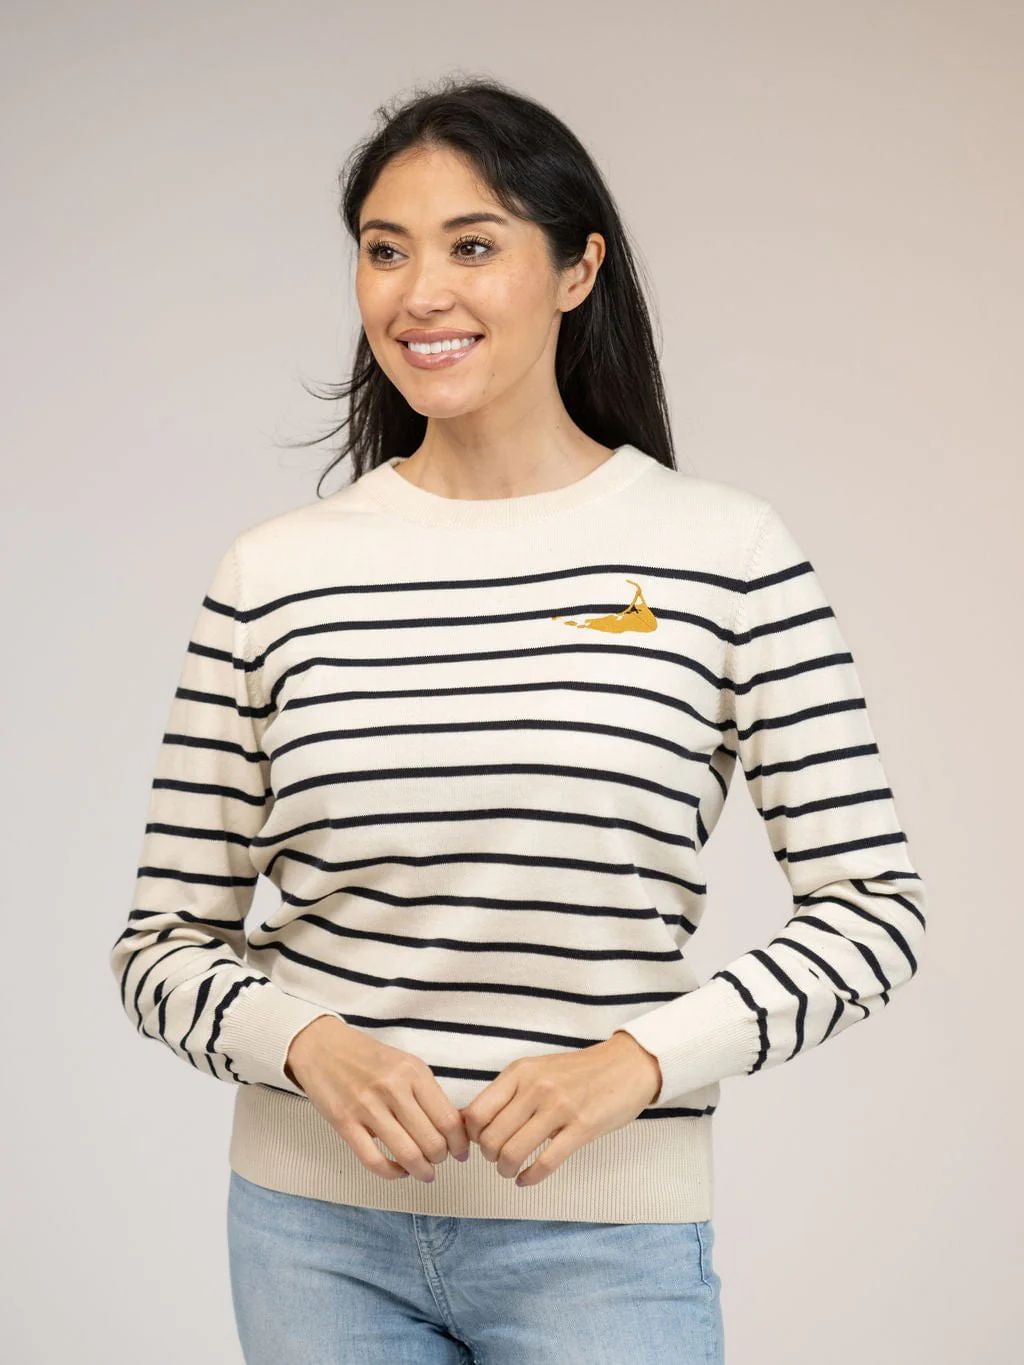 Ivory Striped Sweater with Nantucket Island Embroidery | Beau & Ro